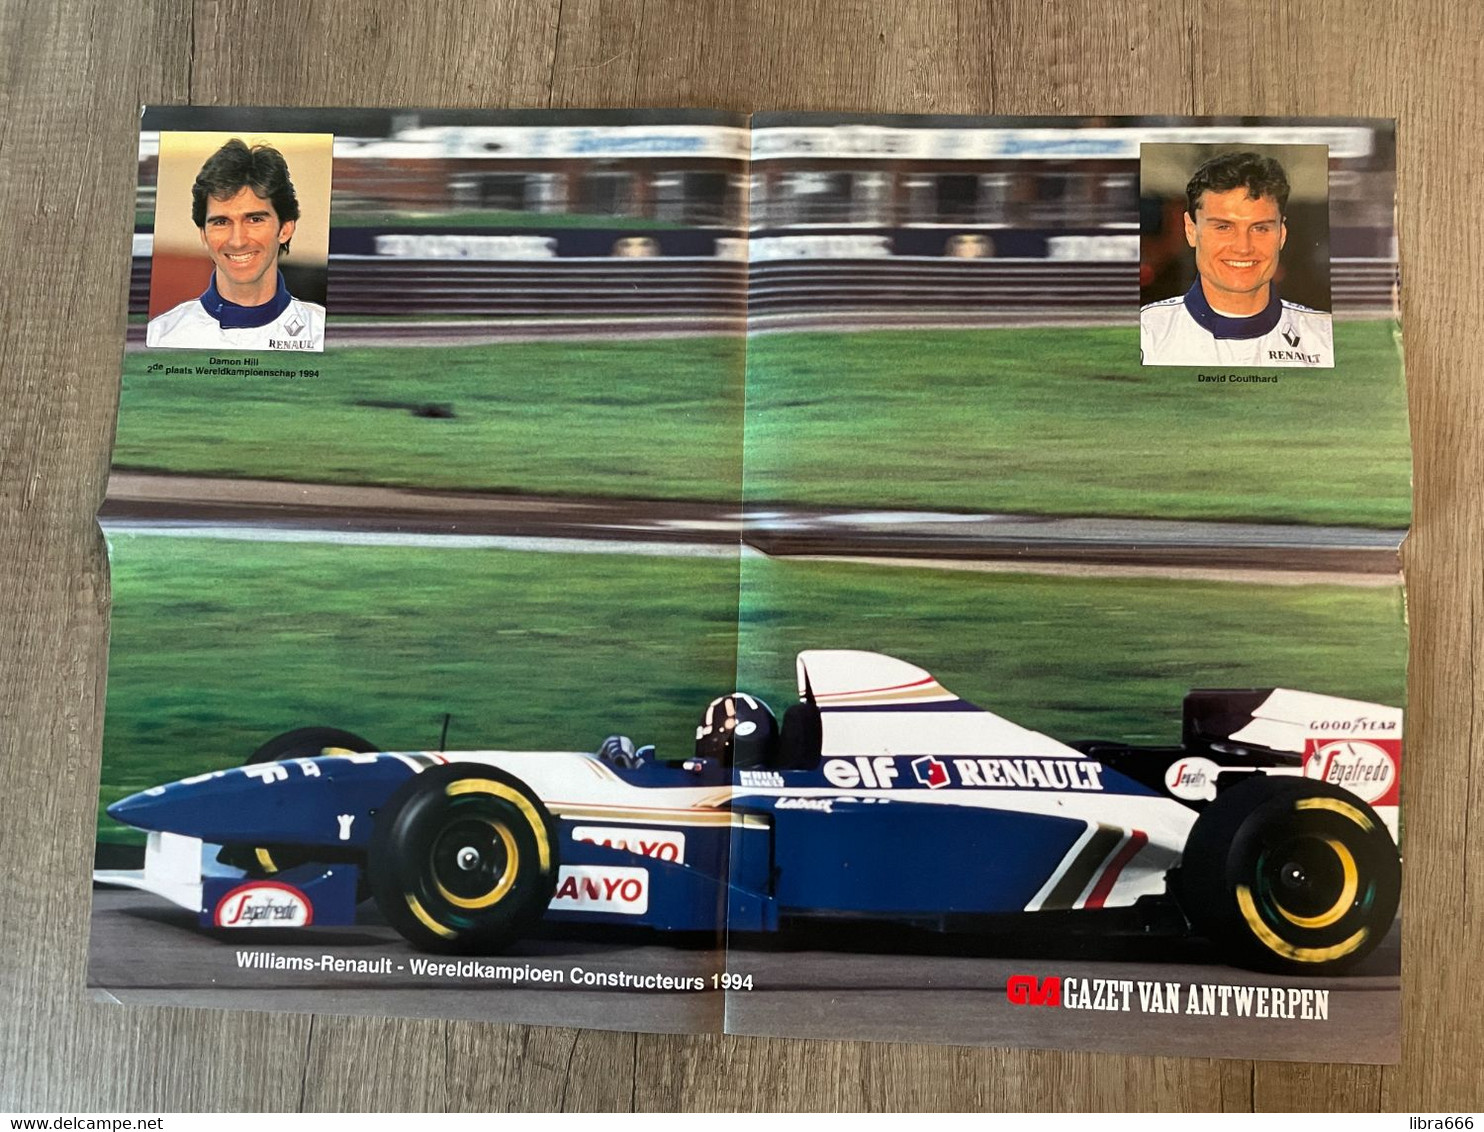 Poster / Affiche - Damon HILL - David COULTHARD - Williams-Renault WC 1994 - 55 X 40 Cm. - Automobilismo - F1